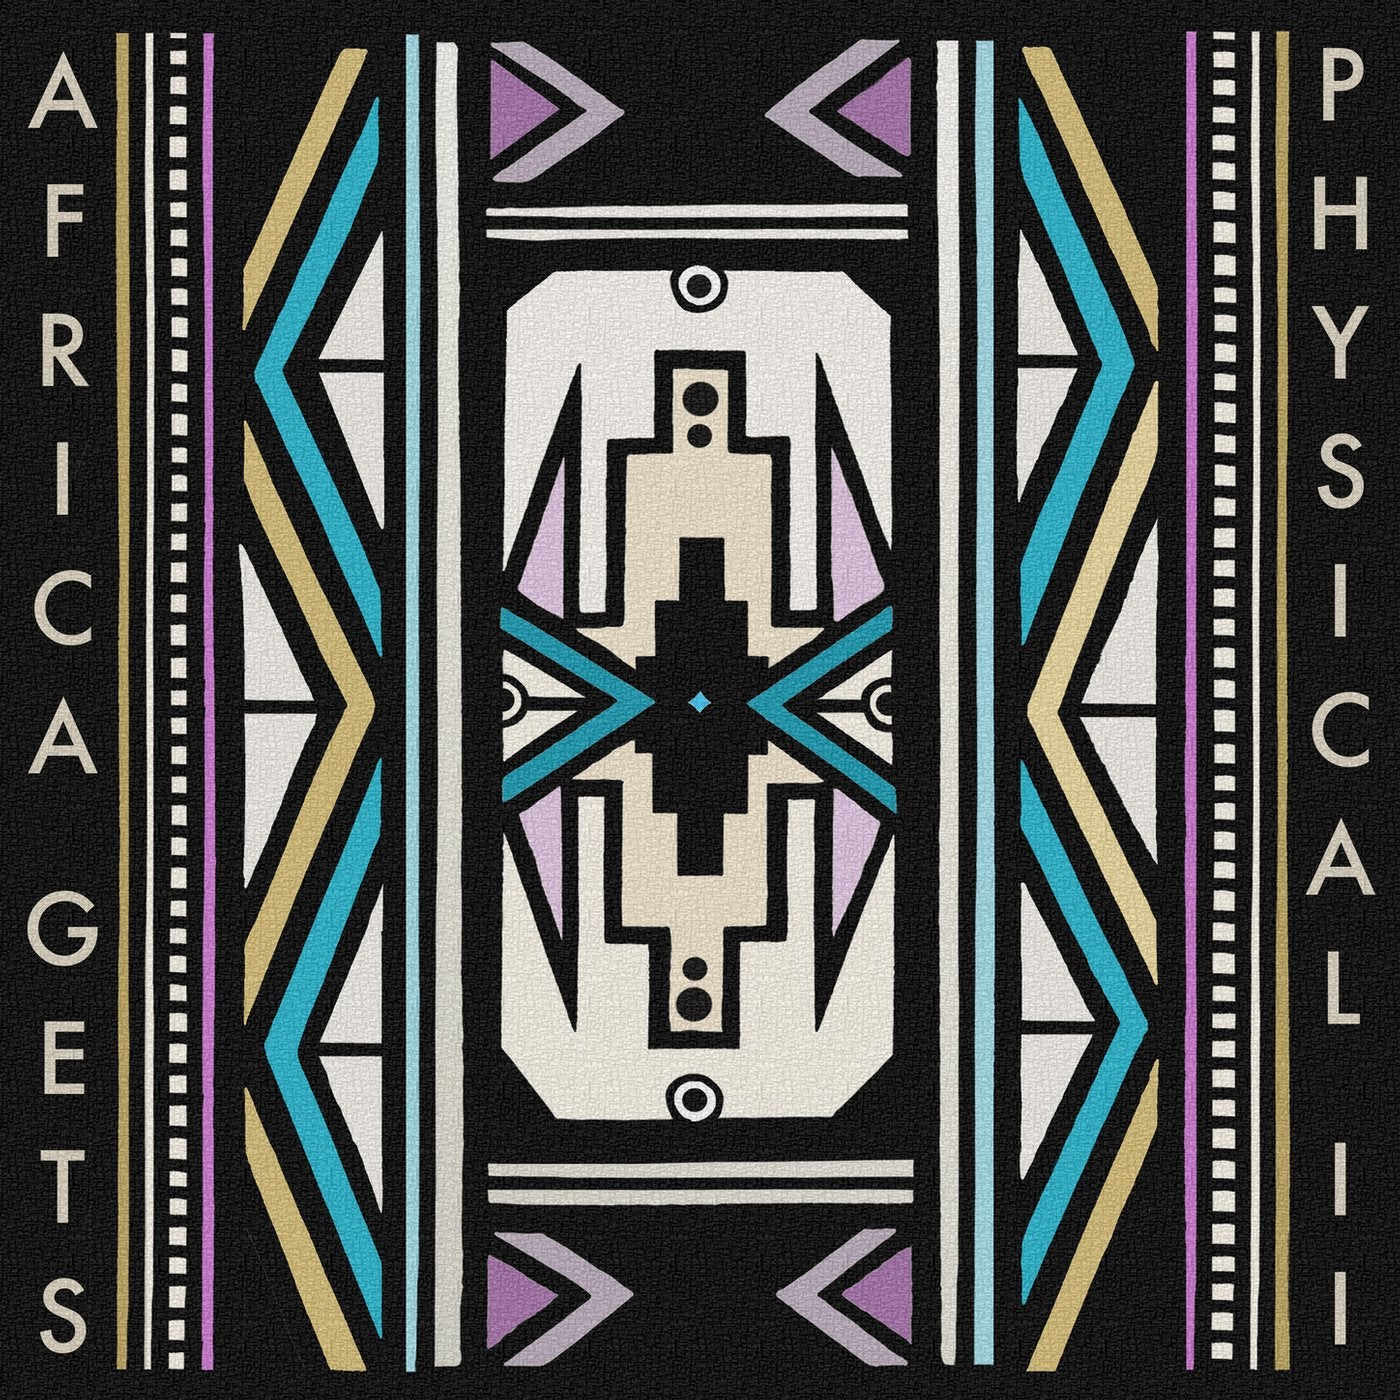 Africa Gets Physical, Vol. 2